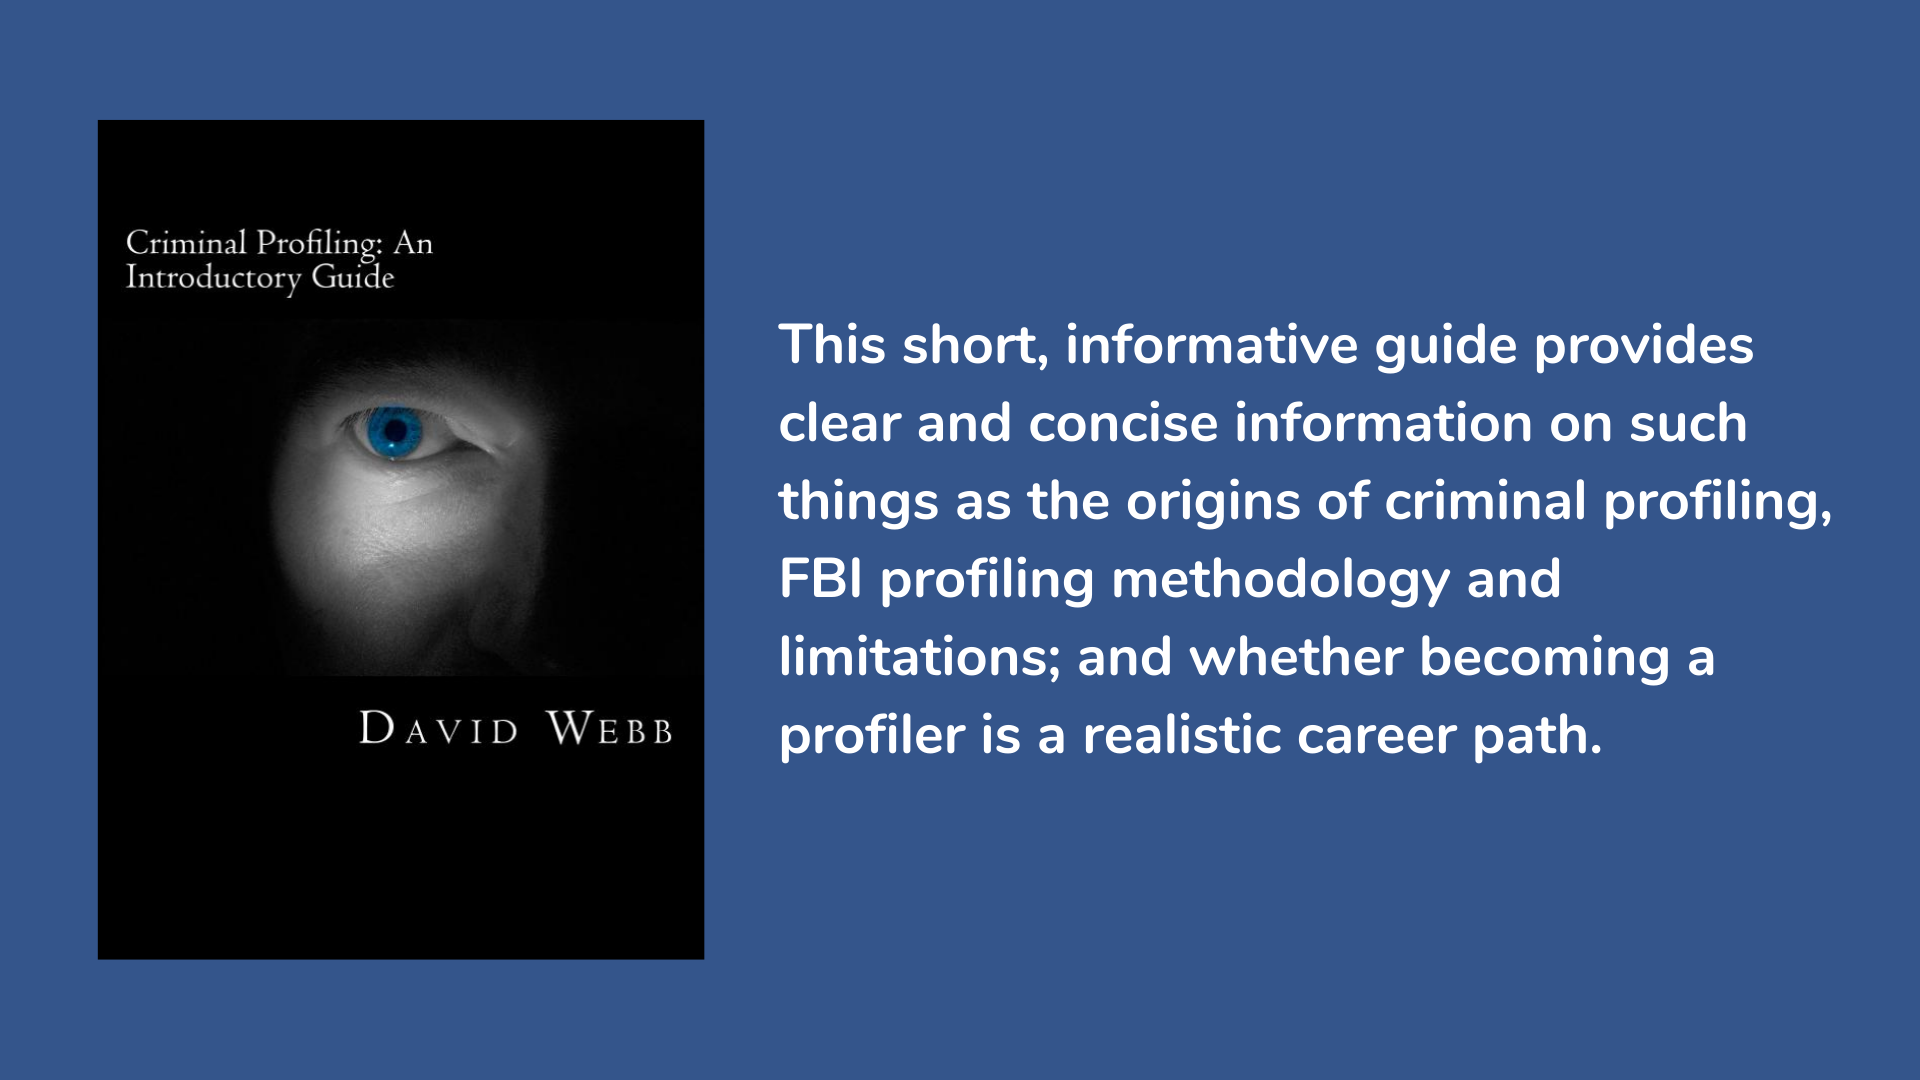 Criminal Profiling: An Introductory Guide Book Cover and Description.